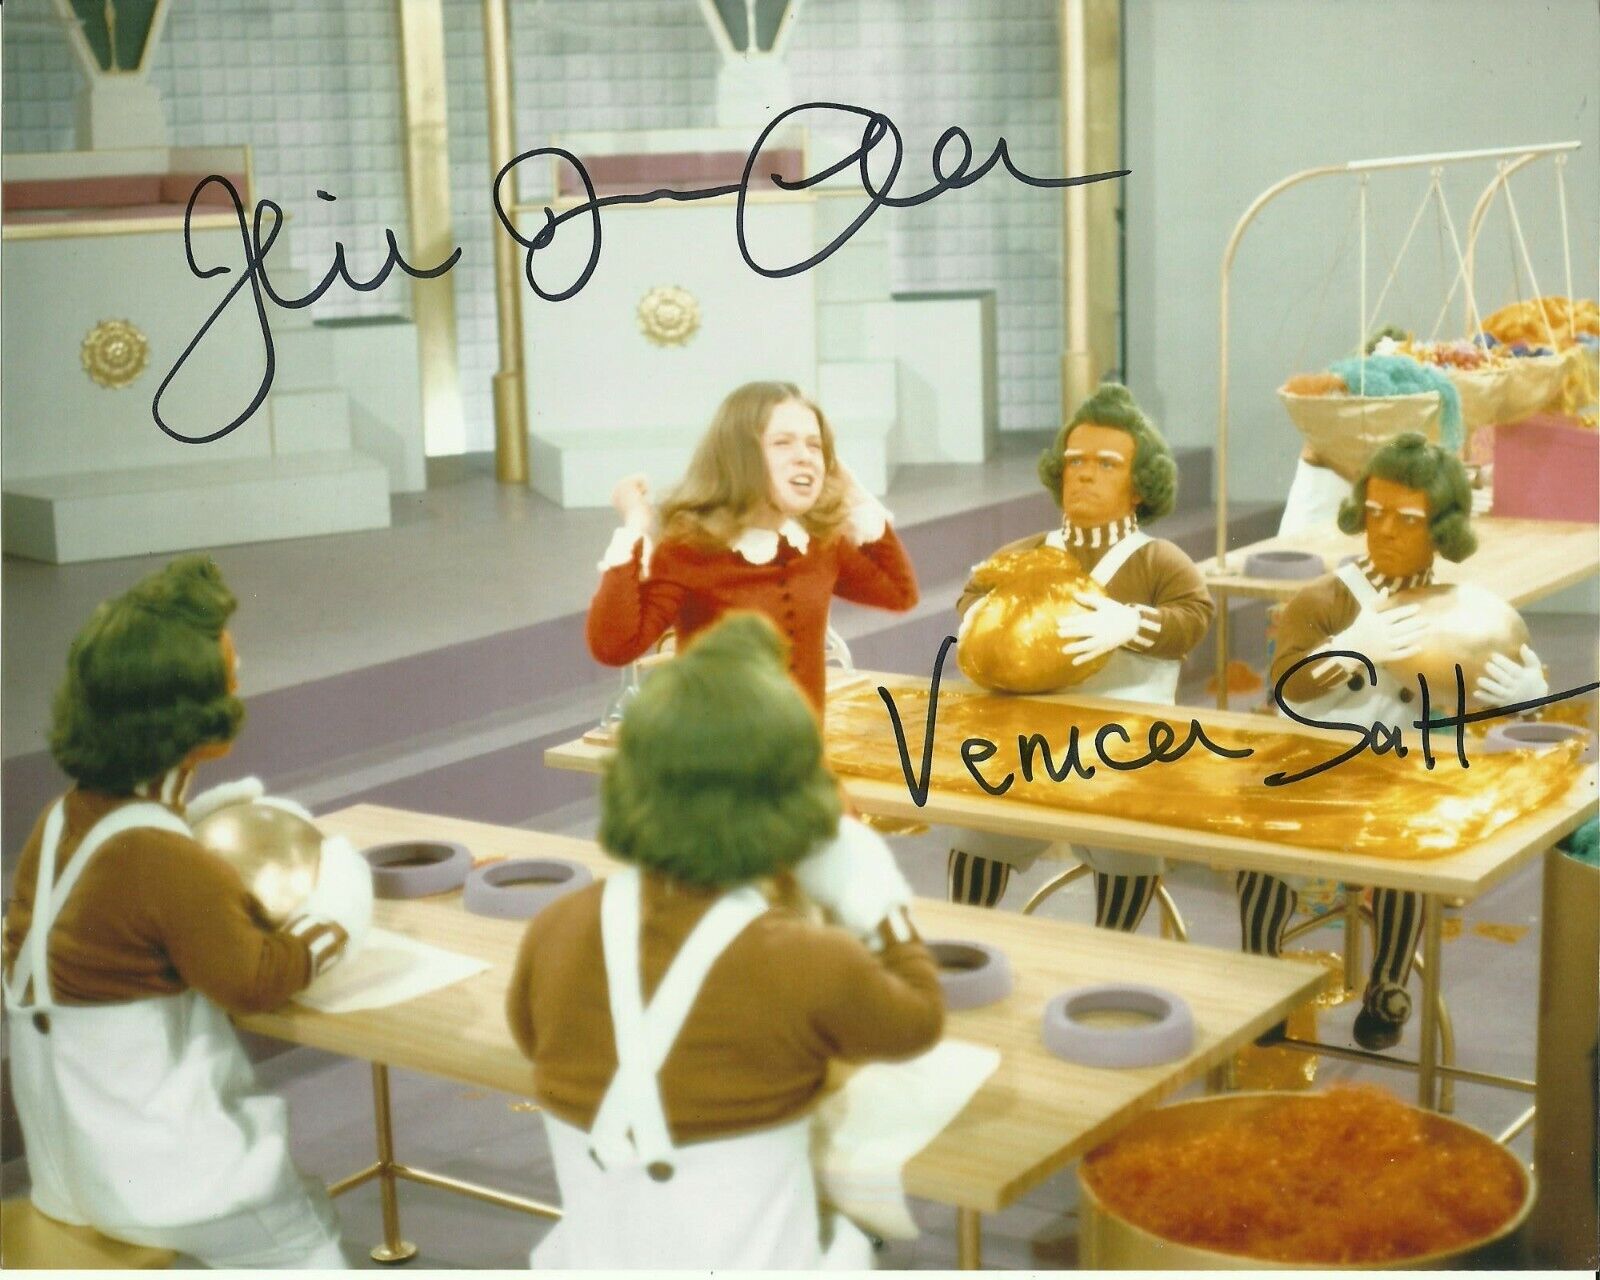 JULIE DAWN COLE SIGNED WILLY WONKA Photo Poster painting UACC REG 242 FILM AUTOGRAPHS